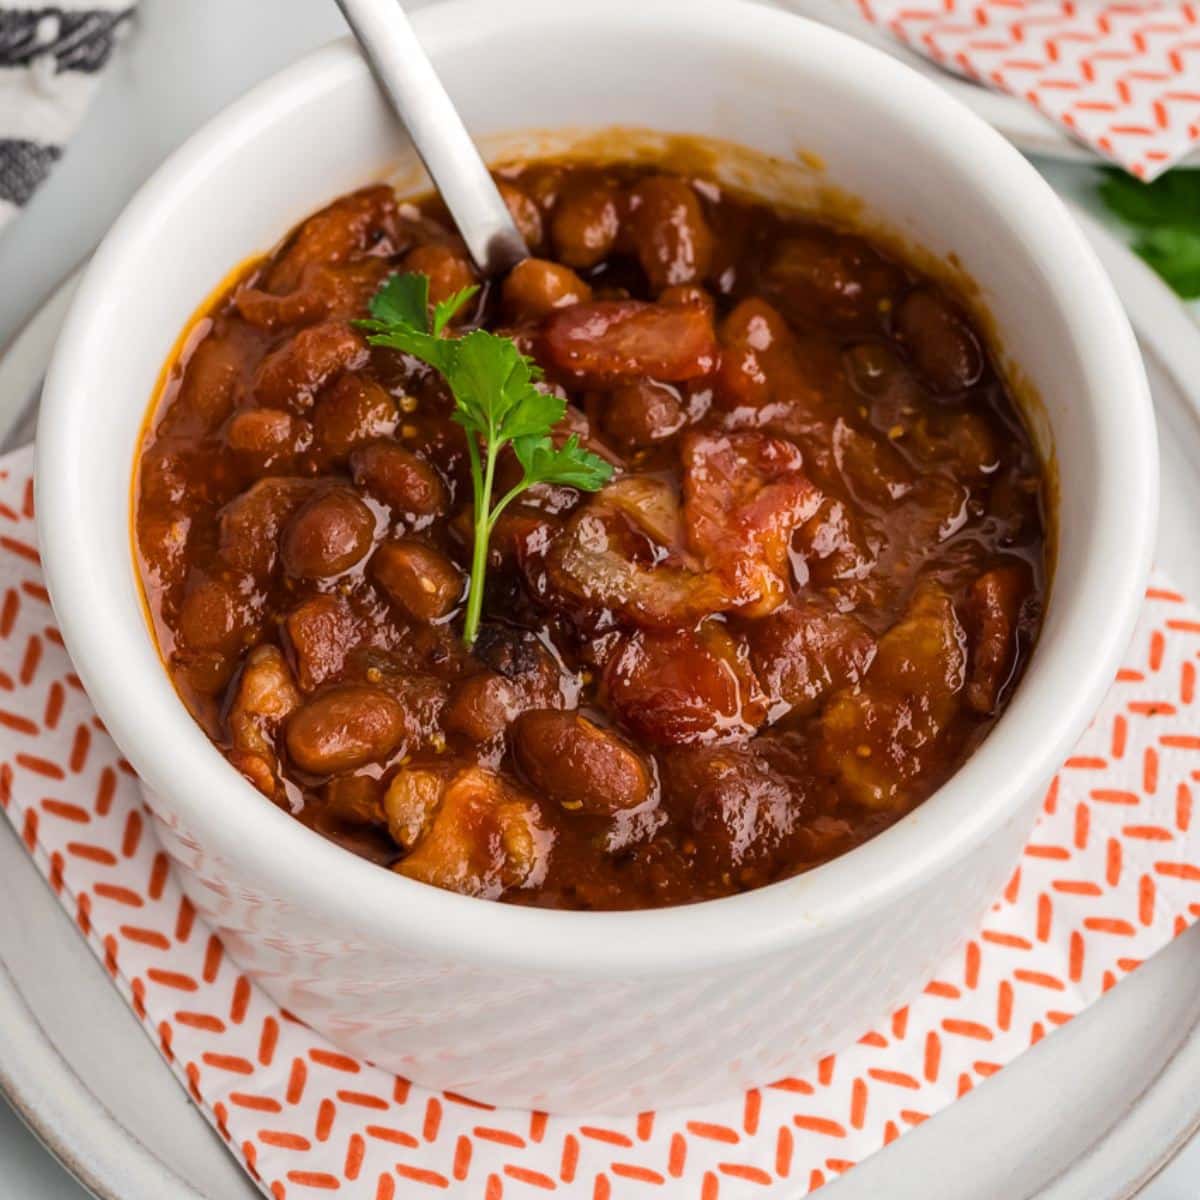 Cowboy baked beans in a bowl with a spoon.